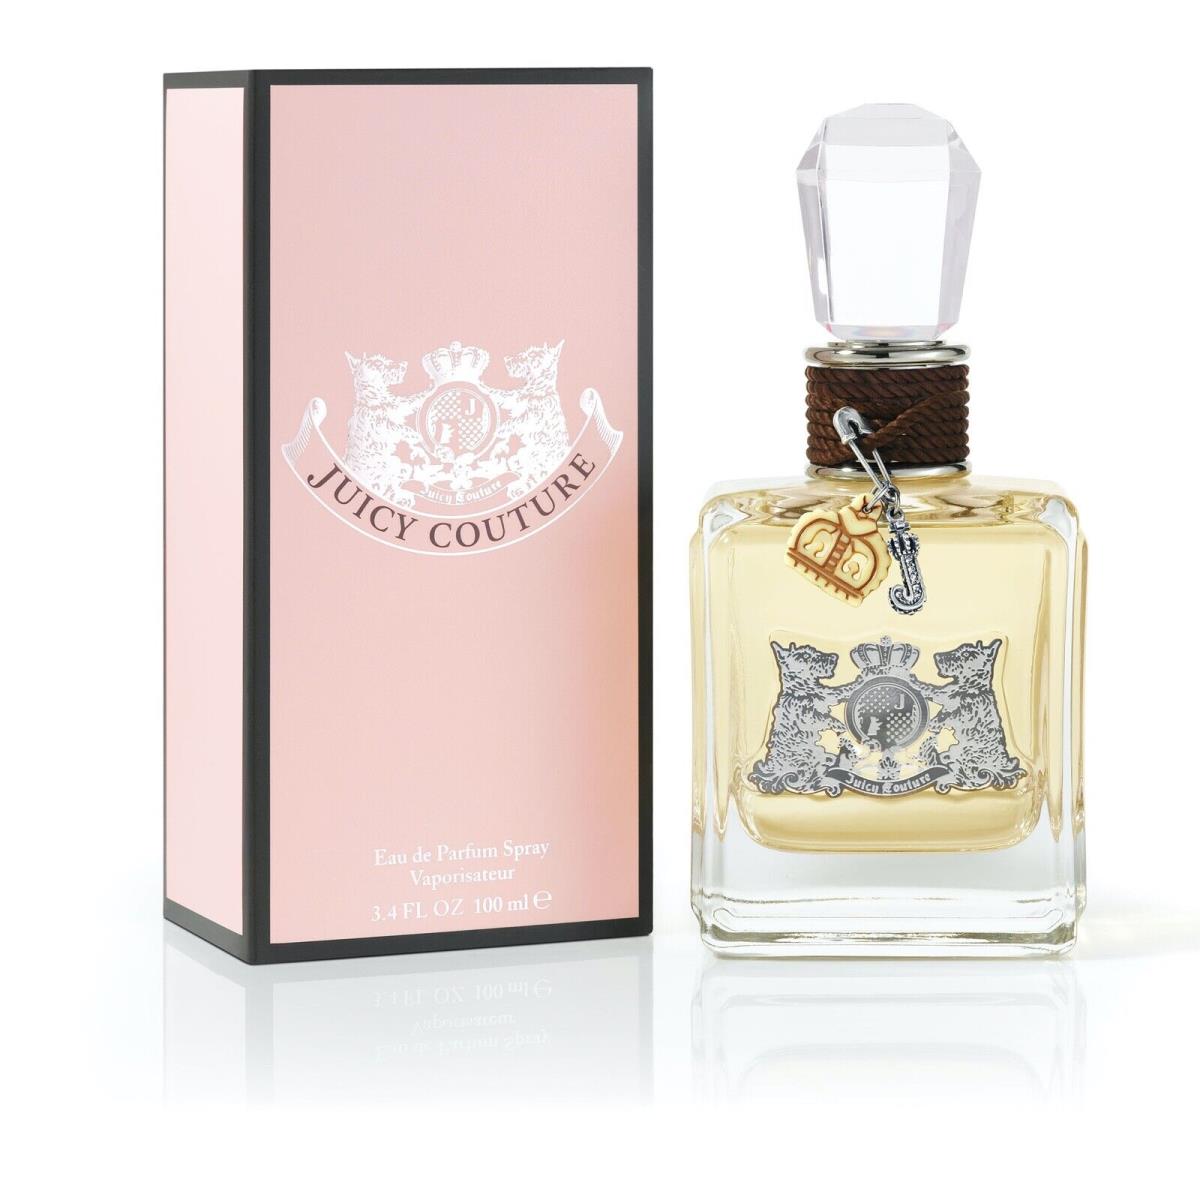 Juicy Couture Edp Spray BY Juicy Couture Women 3.4 OZ